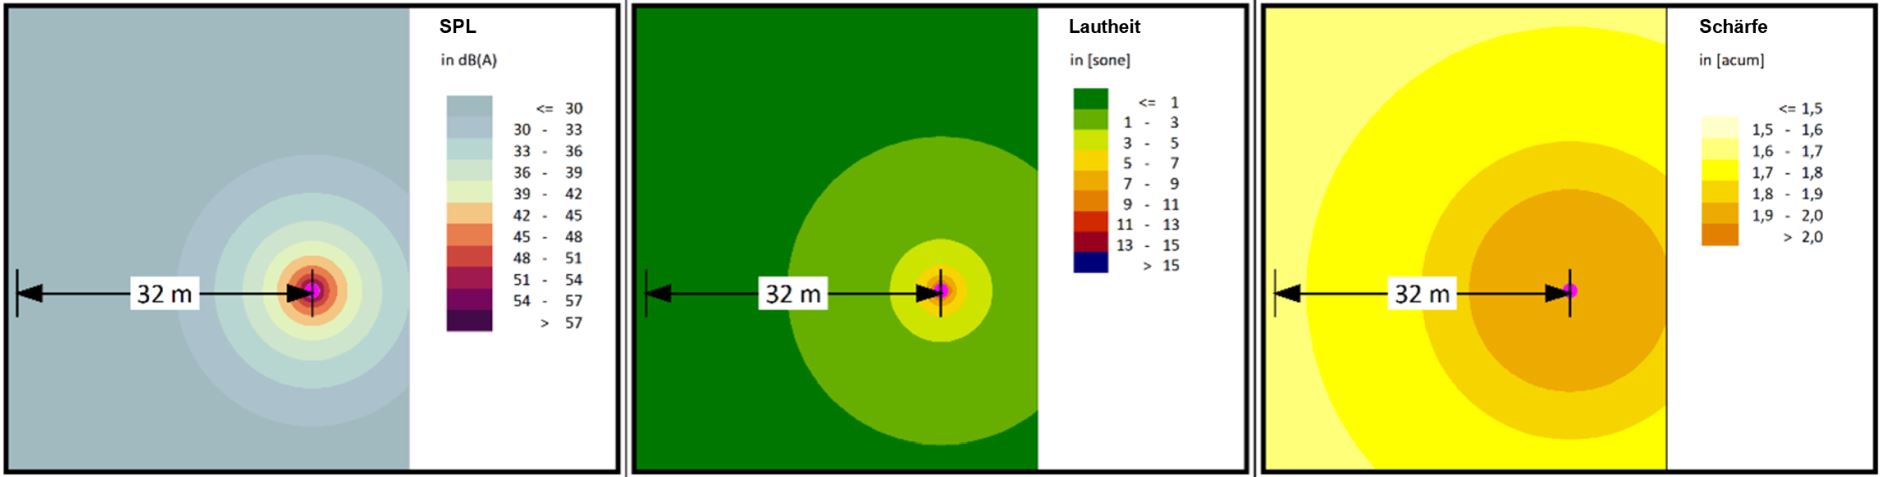 Calculation results of predicted sound immission for sound pressure level, loudness and sharpness